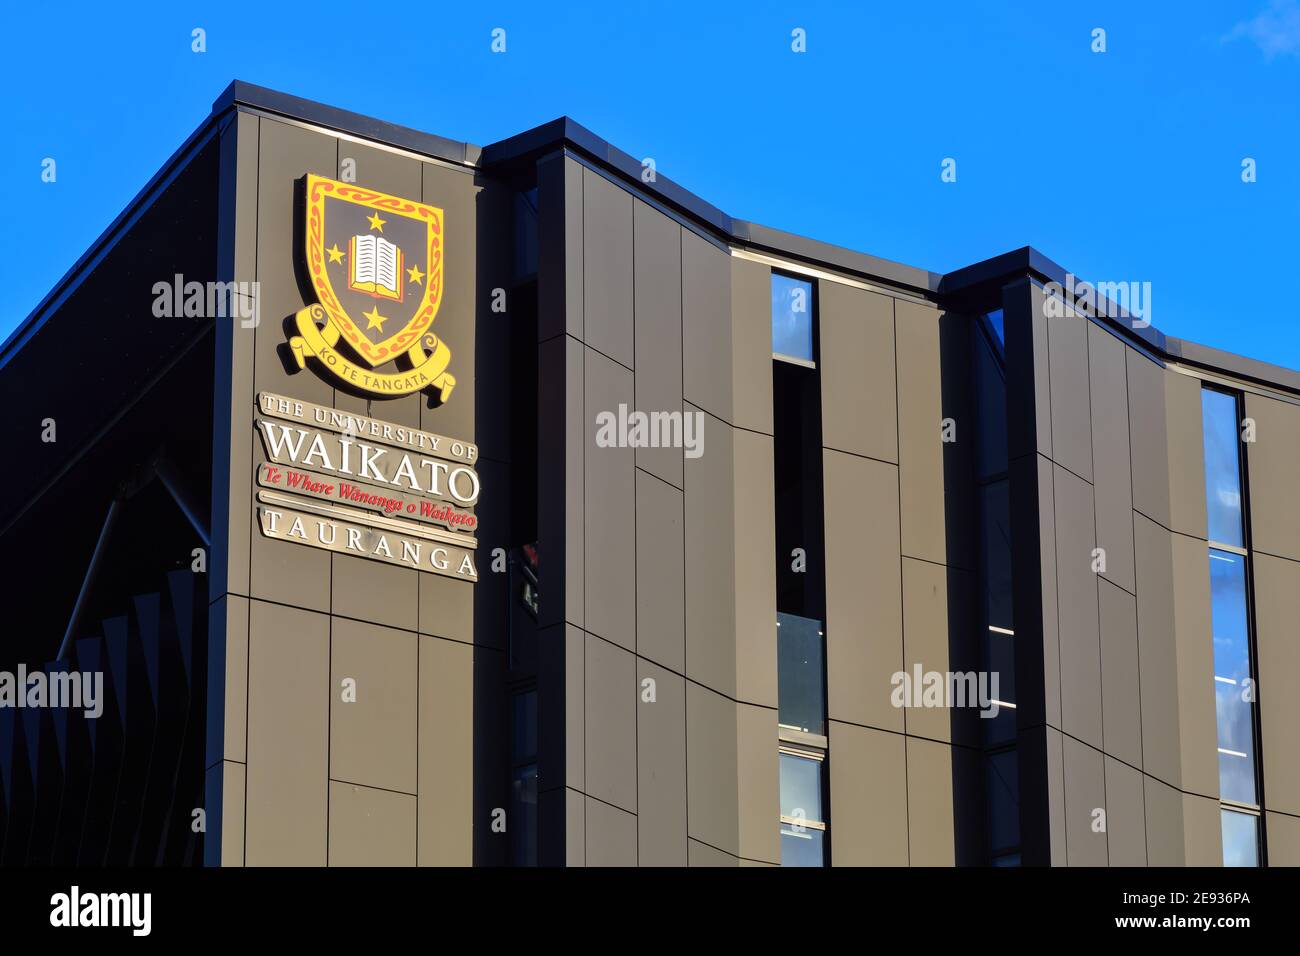 The logo of the University of Waikato on their campus building in Tauranga, New Zealand Stock Photo